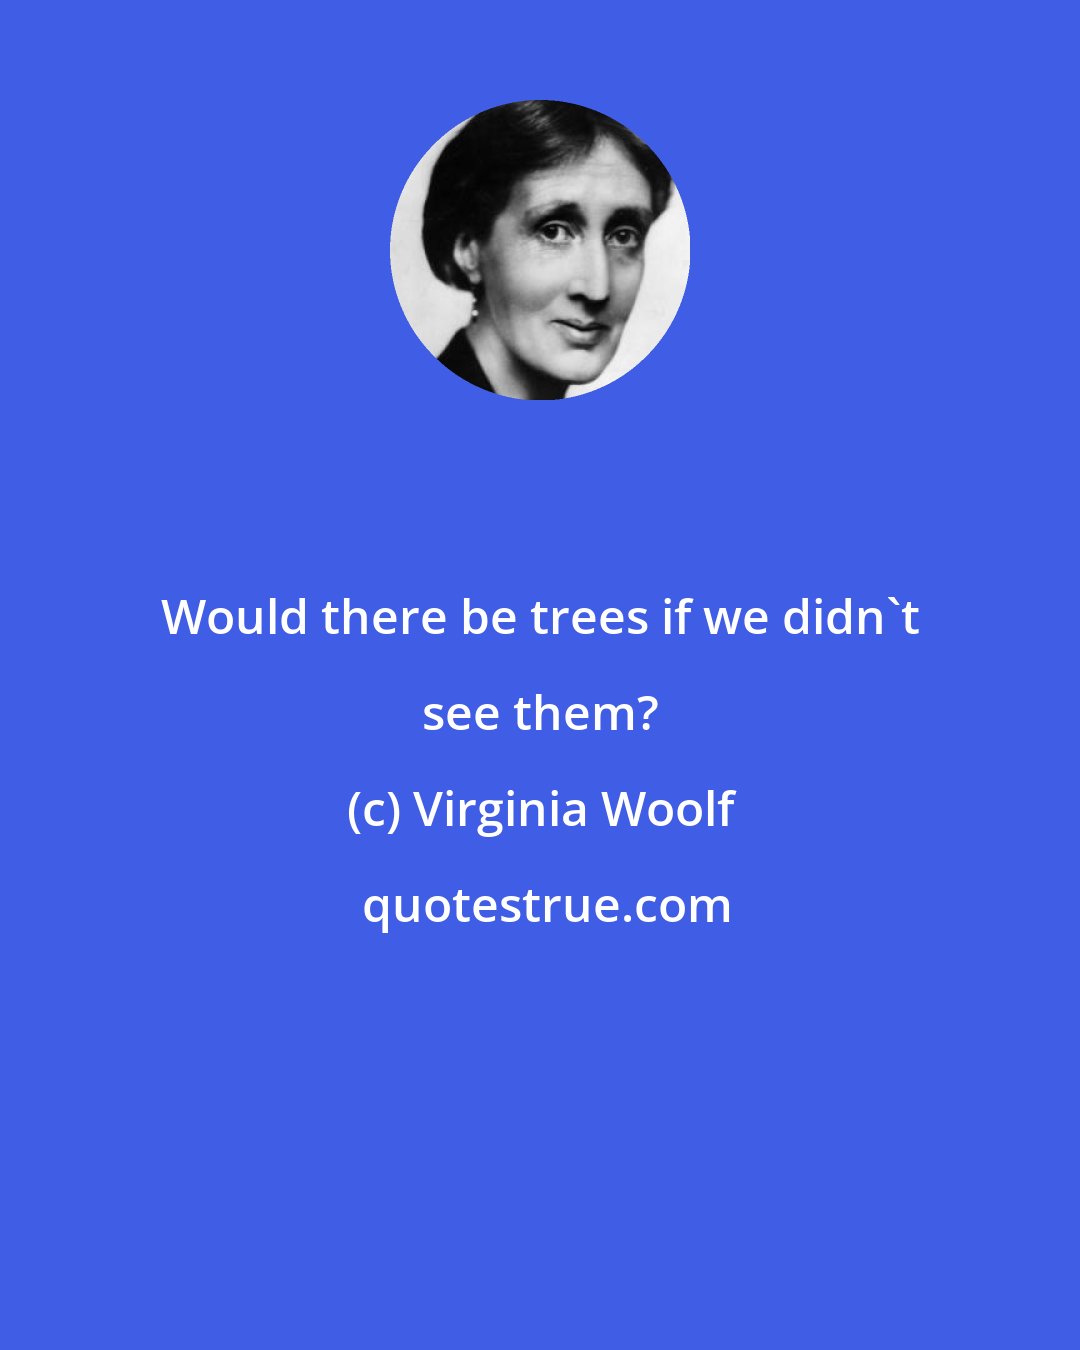 Virginia Woolf: Would there be trees if we didn't see them?